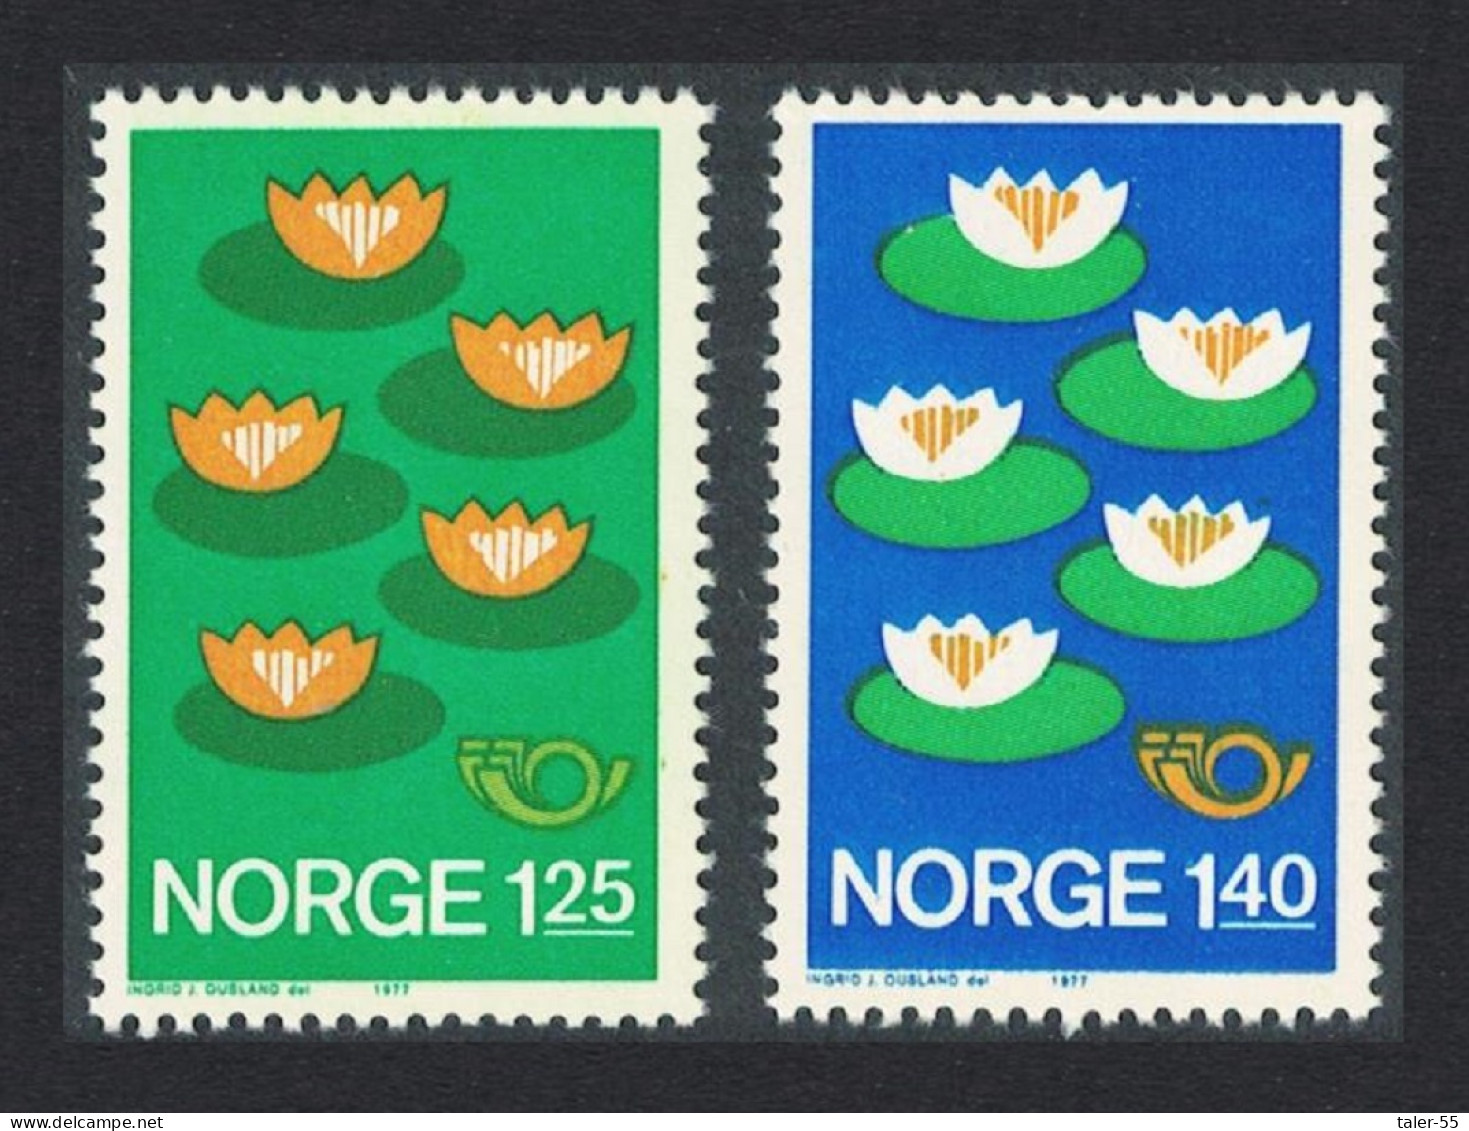 Norway Lotus Flower Environment Protection 2v Joint Issue 1977 MNH SG#770-771 MI#737-738 Sc#688-689 - Ungebraucht